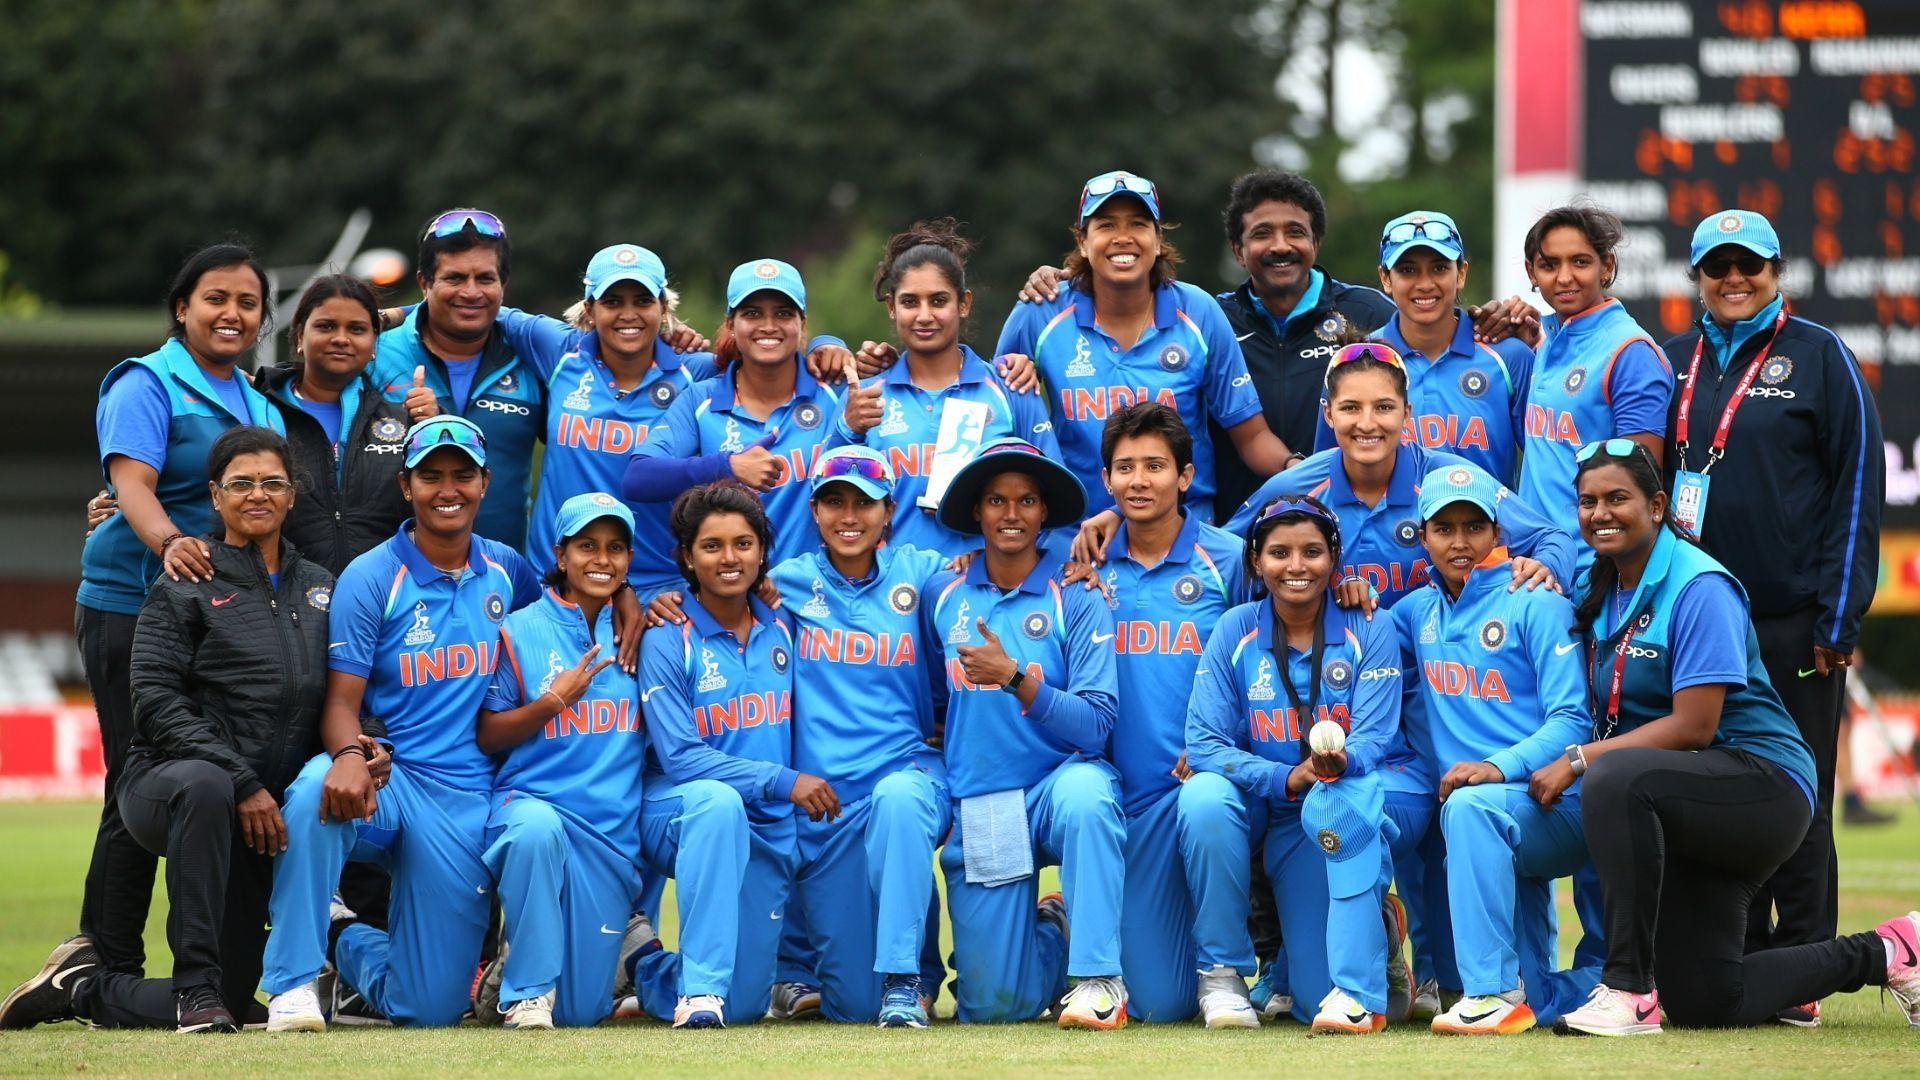 India National Cricket Team Wallpapers Wallpaper Cave 521